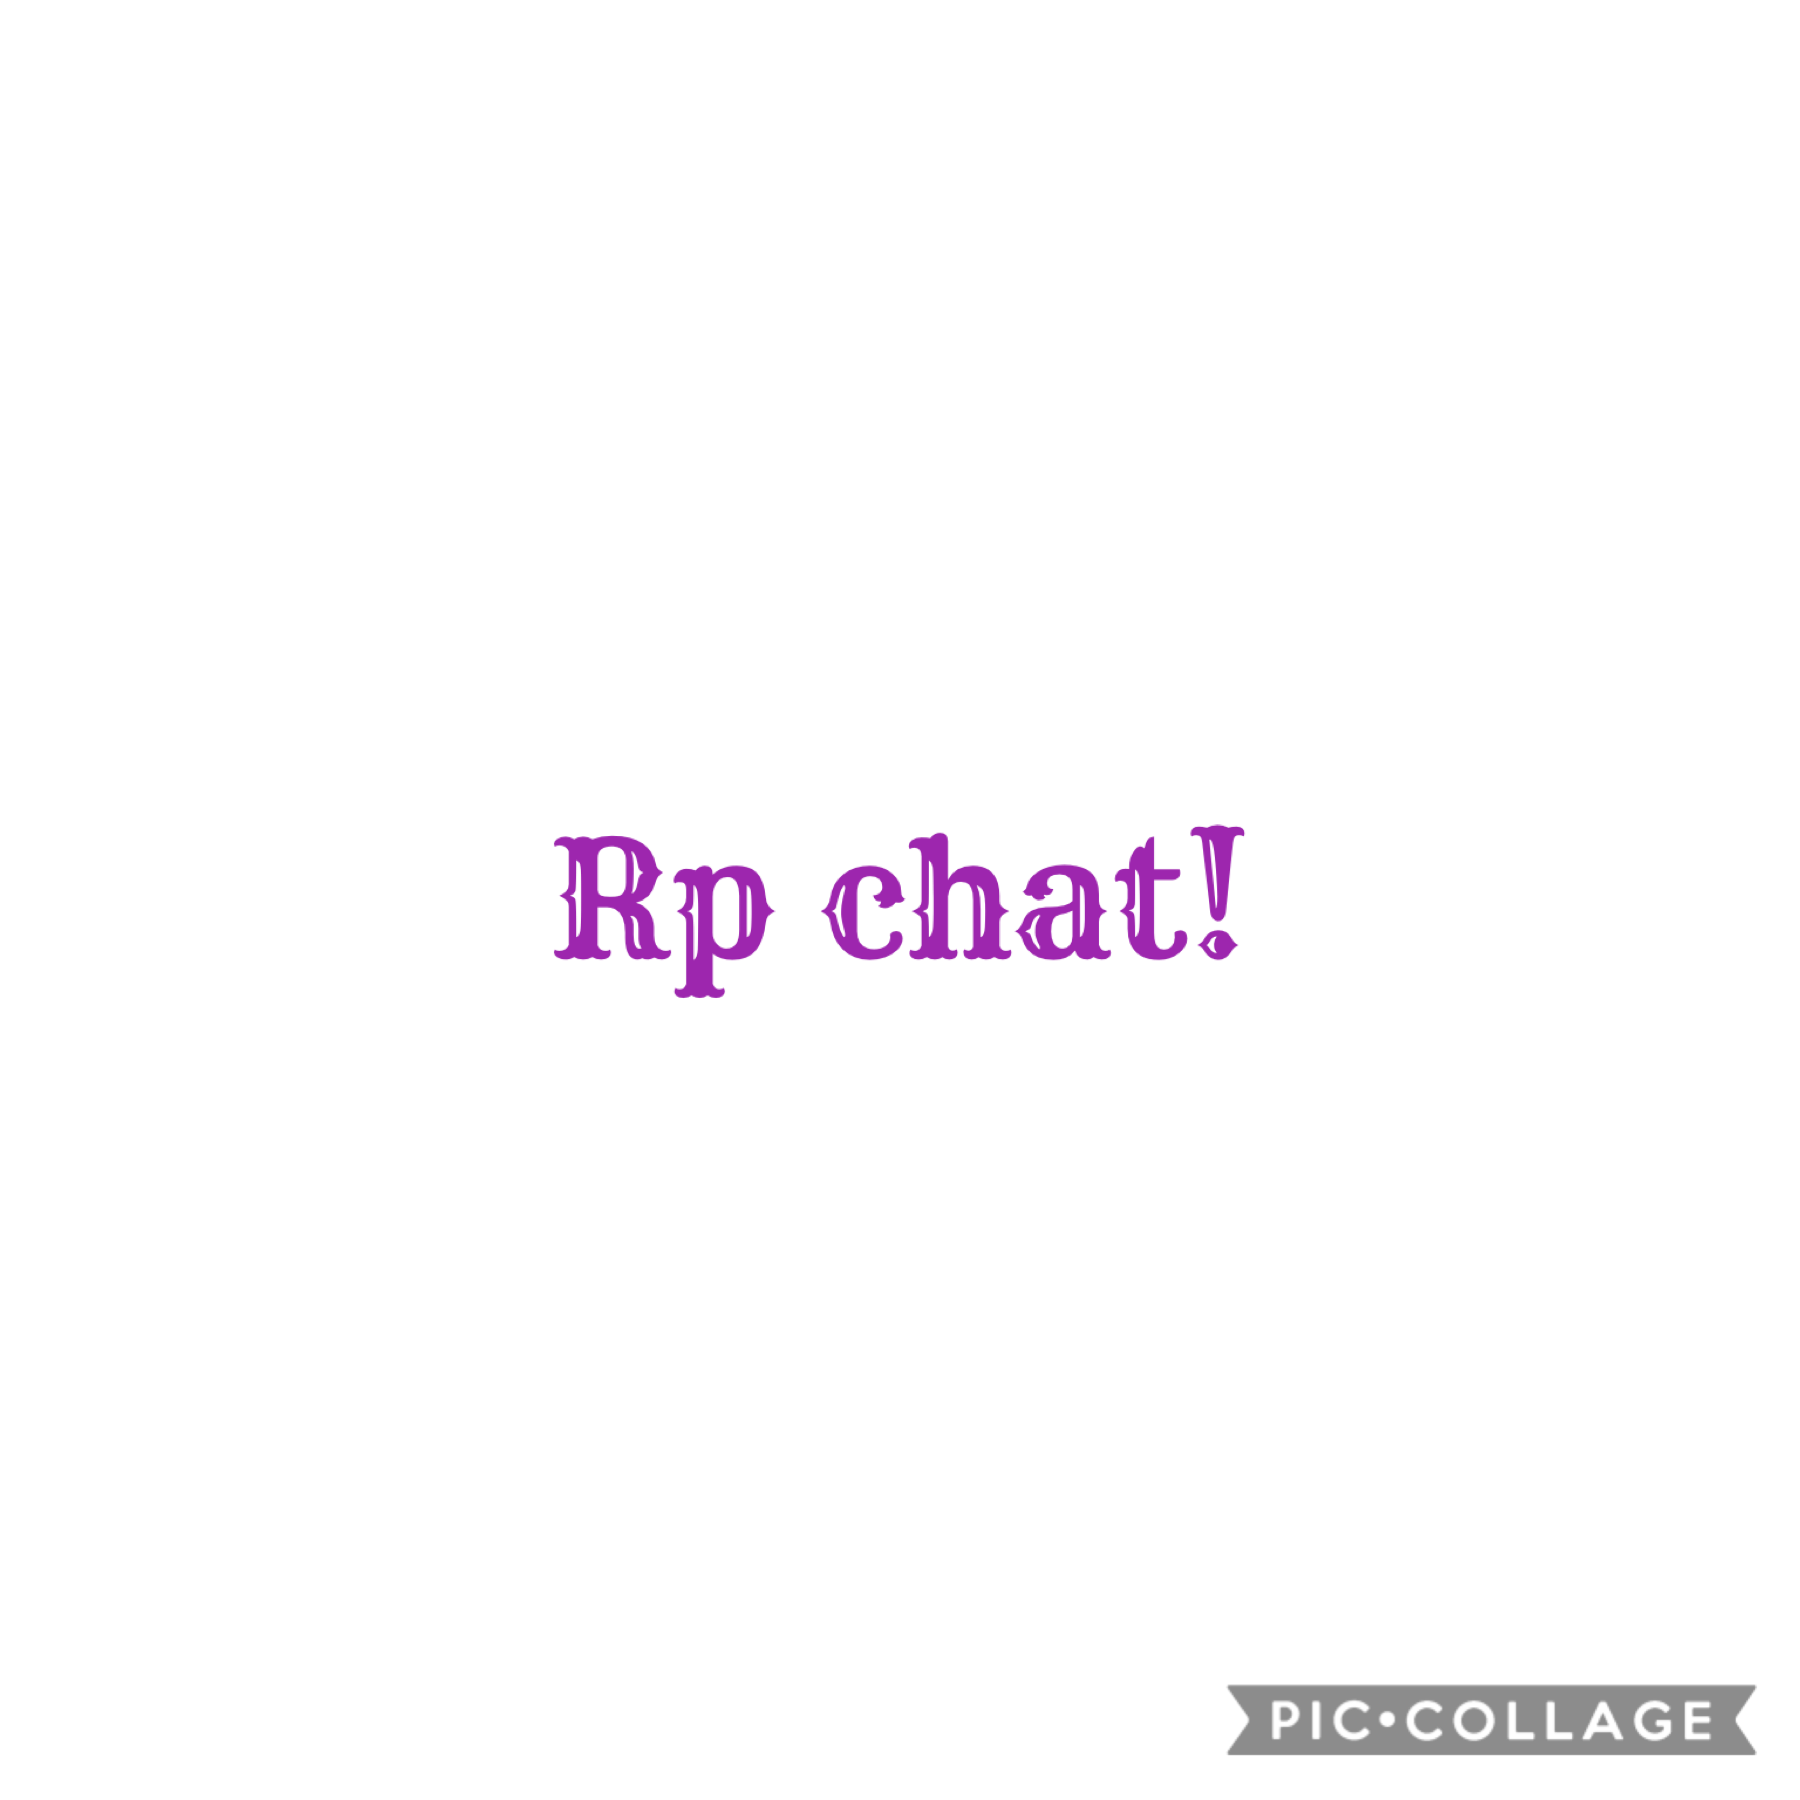 😚✌️tap✌️😚
Yello I love rp so whoever wanna rp this is a chat for it